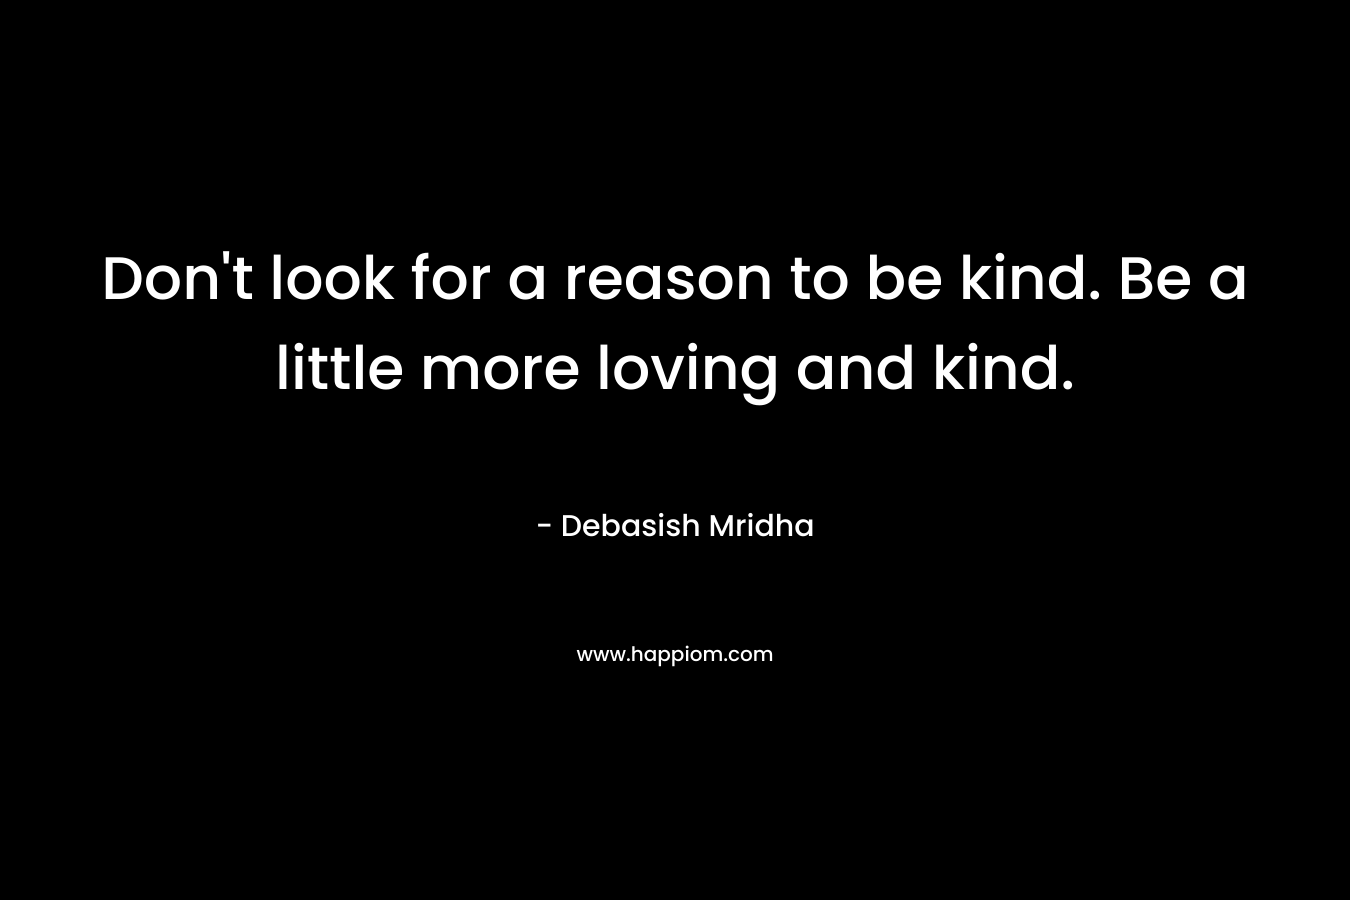 Don't look for a reason to be kind. Be a little more loving and kind.